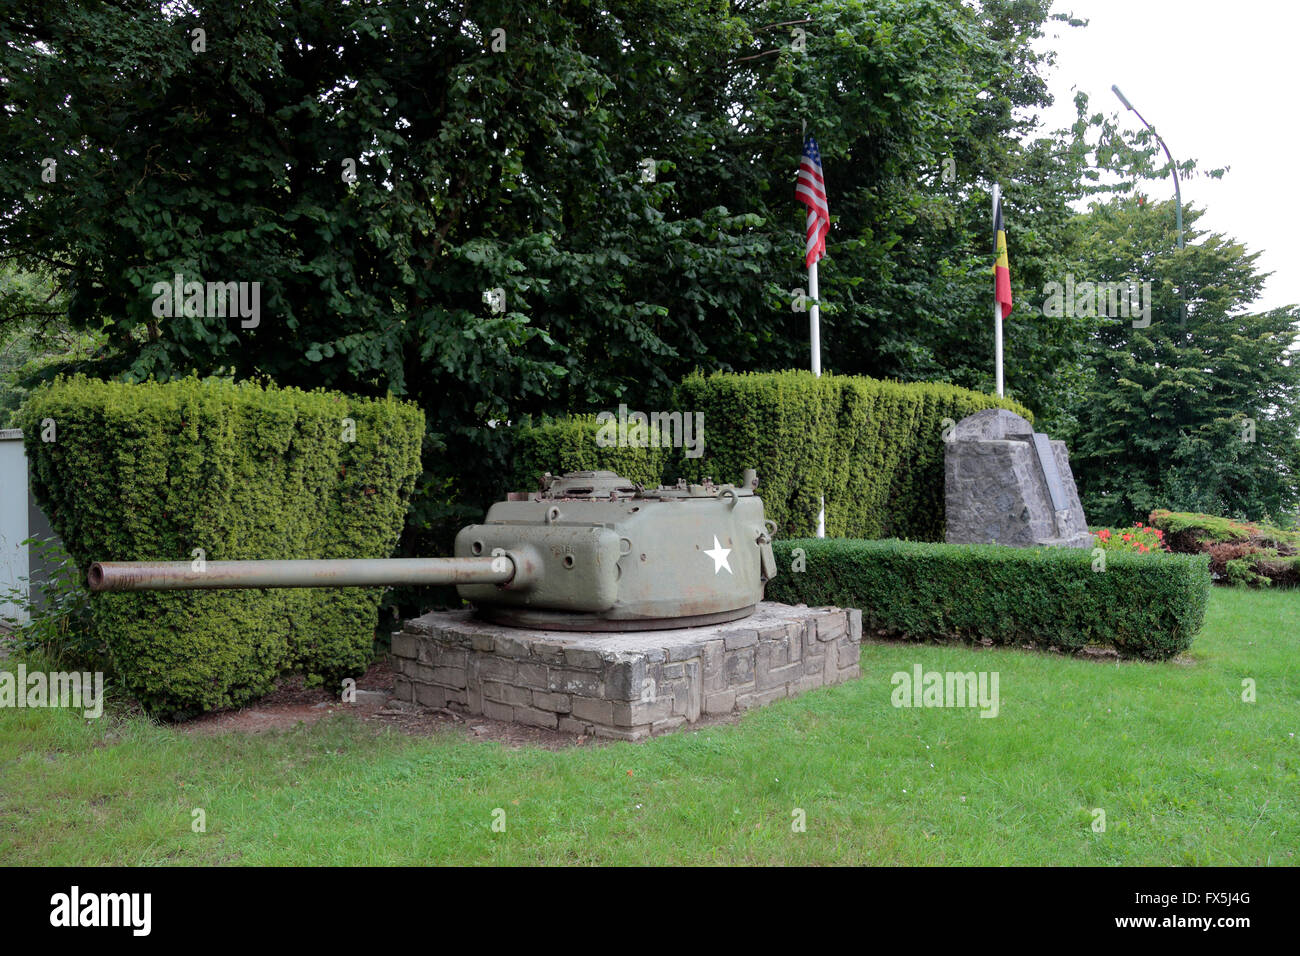 A memorial in the form of a Sherman tank turret, Bastogne, Belgium. Stock Photo